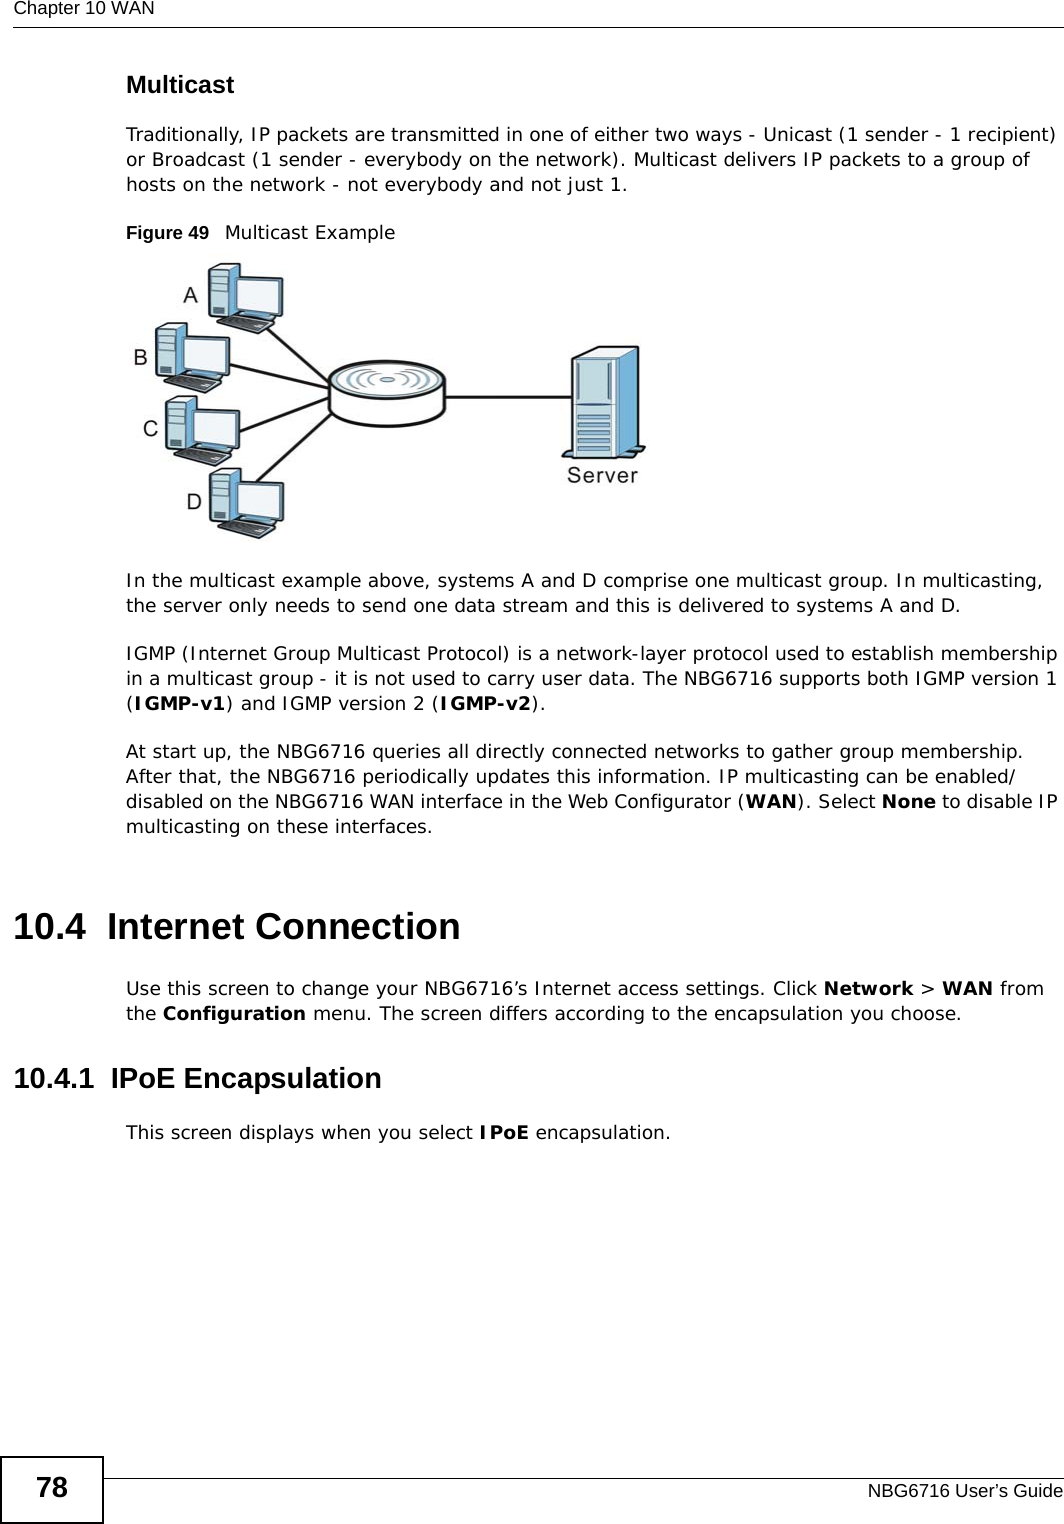 Chapter 10 WANNBG6716 User’s Guide78MulticastTraditionally, IP packets are transmitted in one of either two ways - Unicast (1 sender - 1 recipient) or Broadcast (1 sender - everybody on the network). Multicast delivers IP packets to a group of hosts on the network - not everybody and not just 1. Figure 49   Multicast ExampleIn the multicast example above, systems A and D comprise one multicast group. In multicasting, the server only needs to send one data stream and this is delivered to systems A and D. IGMP (Internet Group Multicast Protocol) is a network-layer protocol used to establish membership in a multicast group - it is not used to carry user data. The NBG6716 supports both IGMP version 1 (IGMP-v1) and IGMP version 2 (IGMP-v2). At start up, the NBG6716 queries all directly connected networks to gather group membership. After that, the NBG6716 periodically updates this information. IP multicasting can be enabled/disabled on the NBG6716 WAN interface in the Web Configurator (WAN). Select None to disable IP multicasting on these interfaces.10.4  Internet ConnectionUse this screen to change your NBG6716’s Internet access settings. Click Network &gt; WAN from the Configuration menu. The screen differs according to the encapsulation you choose.10.4.1  IPoE EncapsulationThis screen displays when you select IPoE encapsulation.